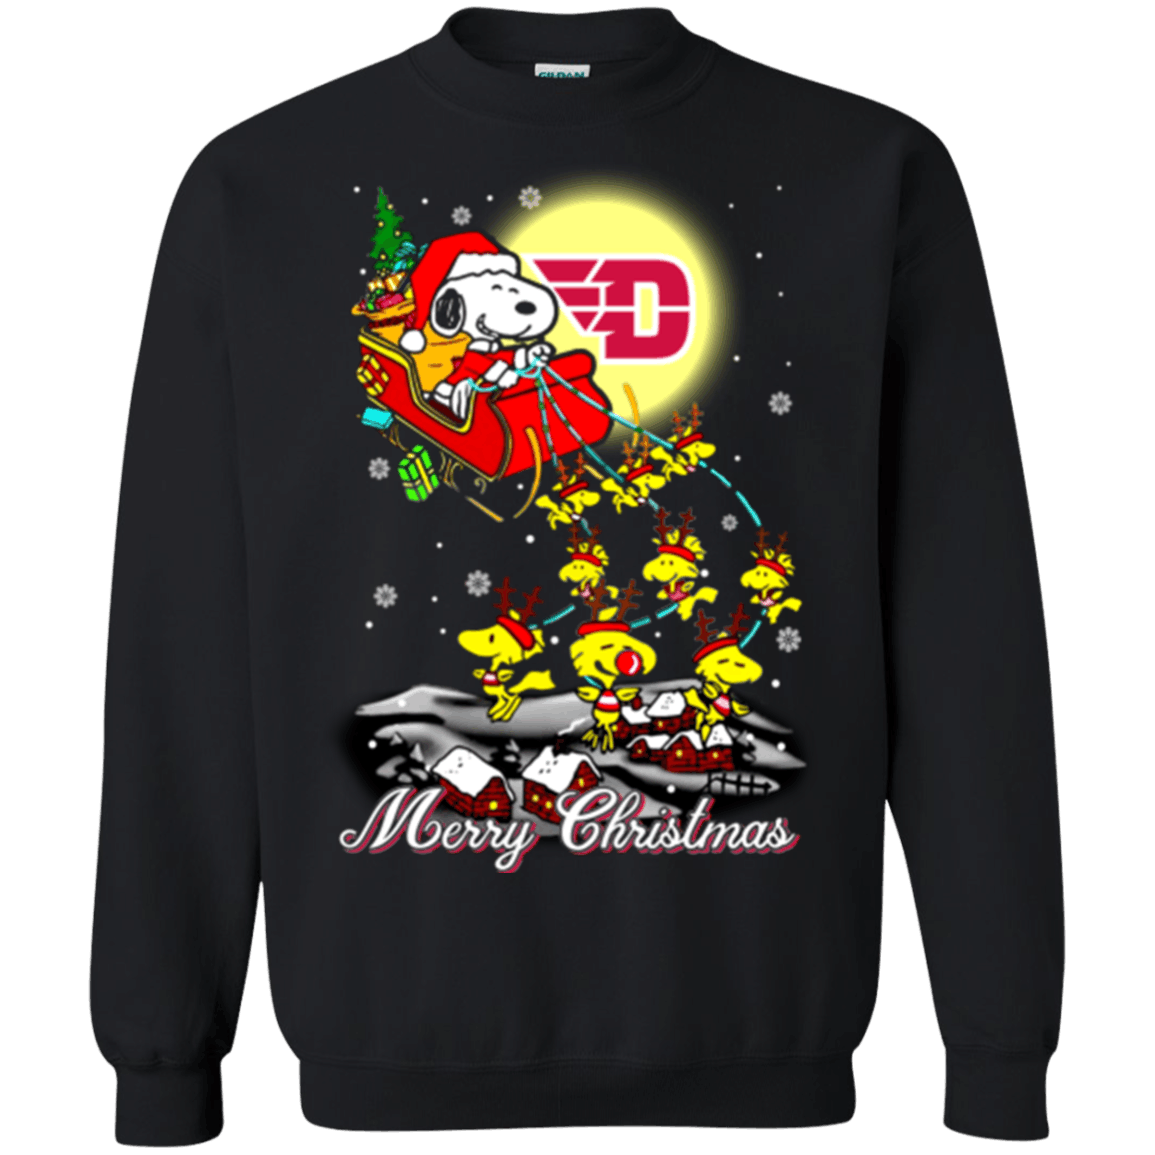 Amazing Dayton Flyers Snoopy Ugly Christmas Sweaters Santa Claus With Sleigh Sweatshirts